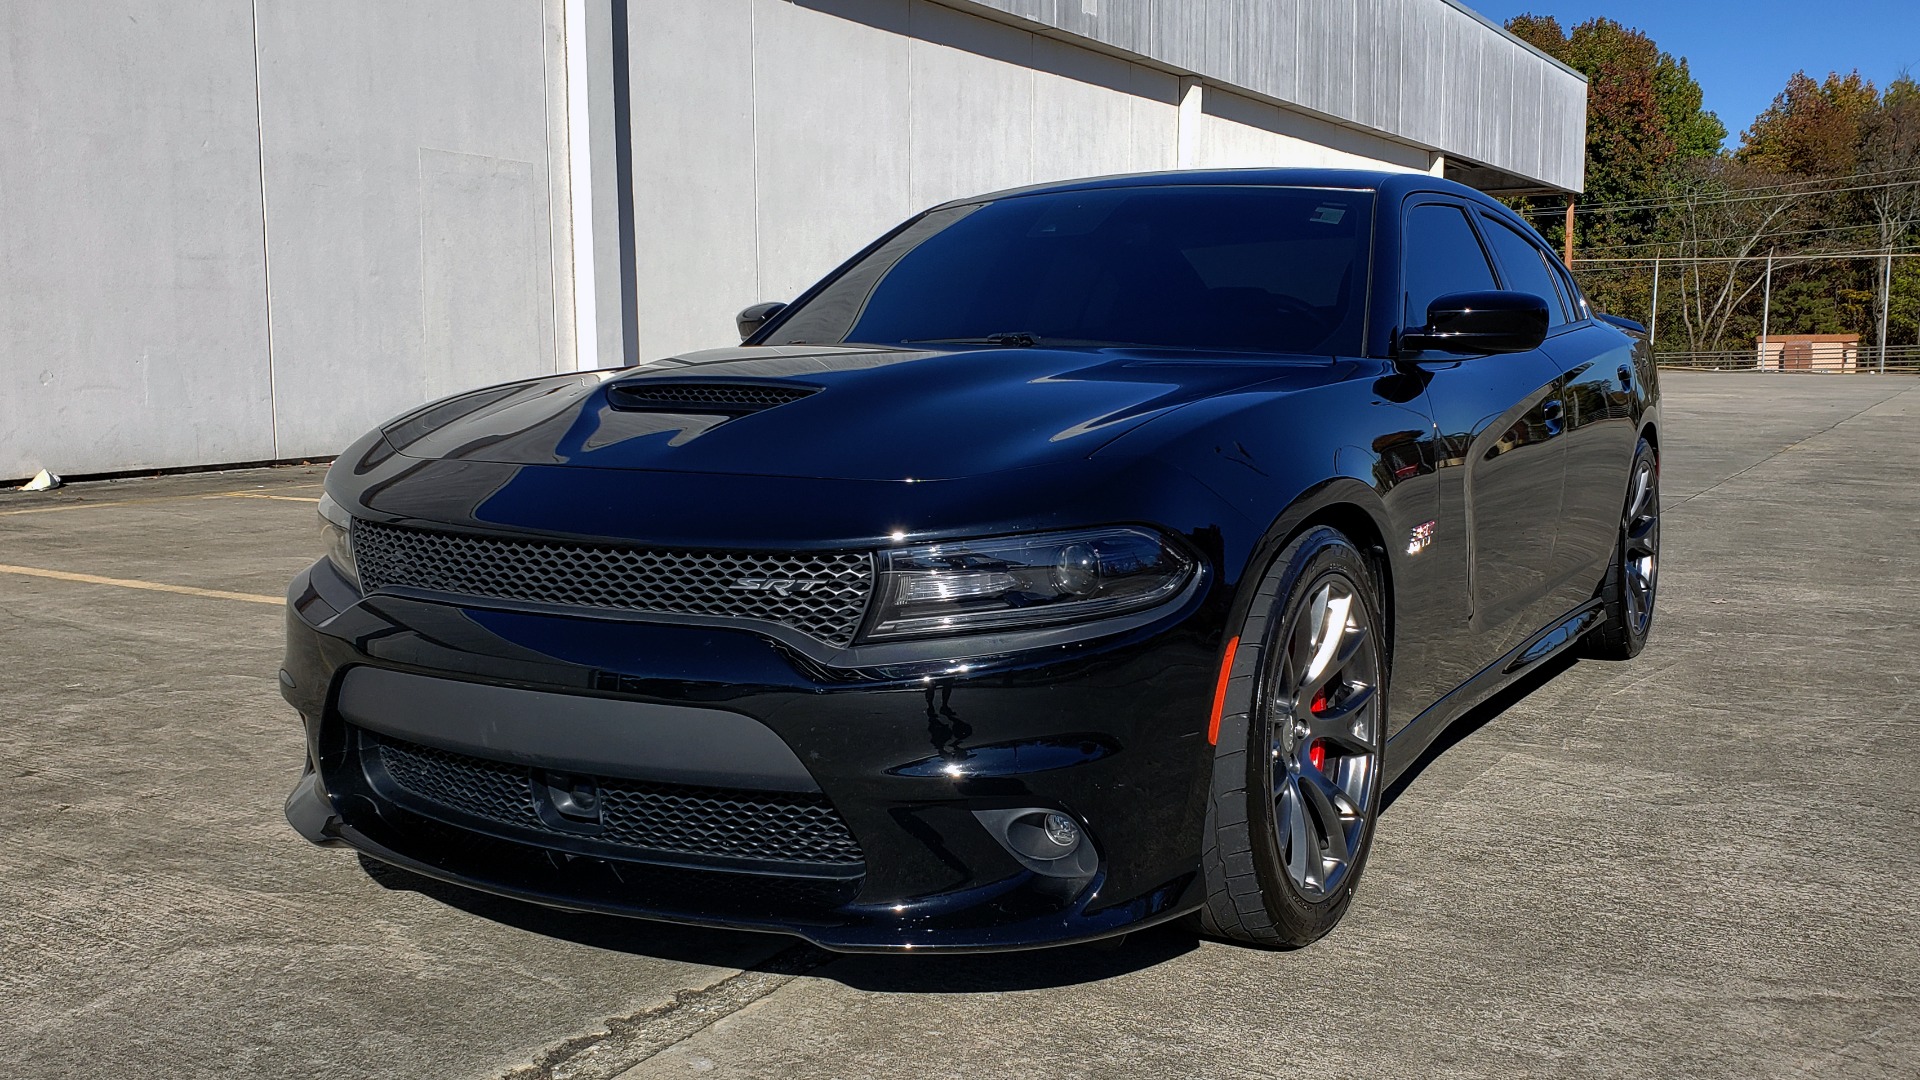 Used 2017 Dodge Charger SRT 392 for sale Sold at Formula Imports in Charlotte NC 28227 1